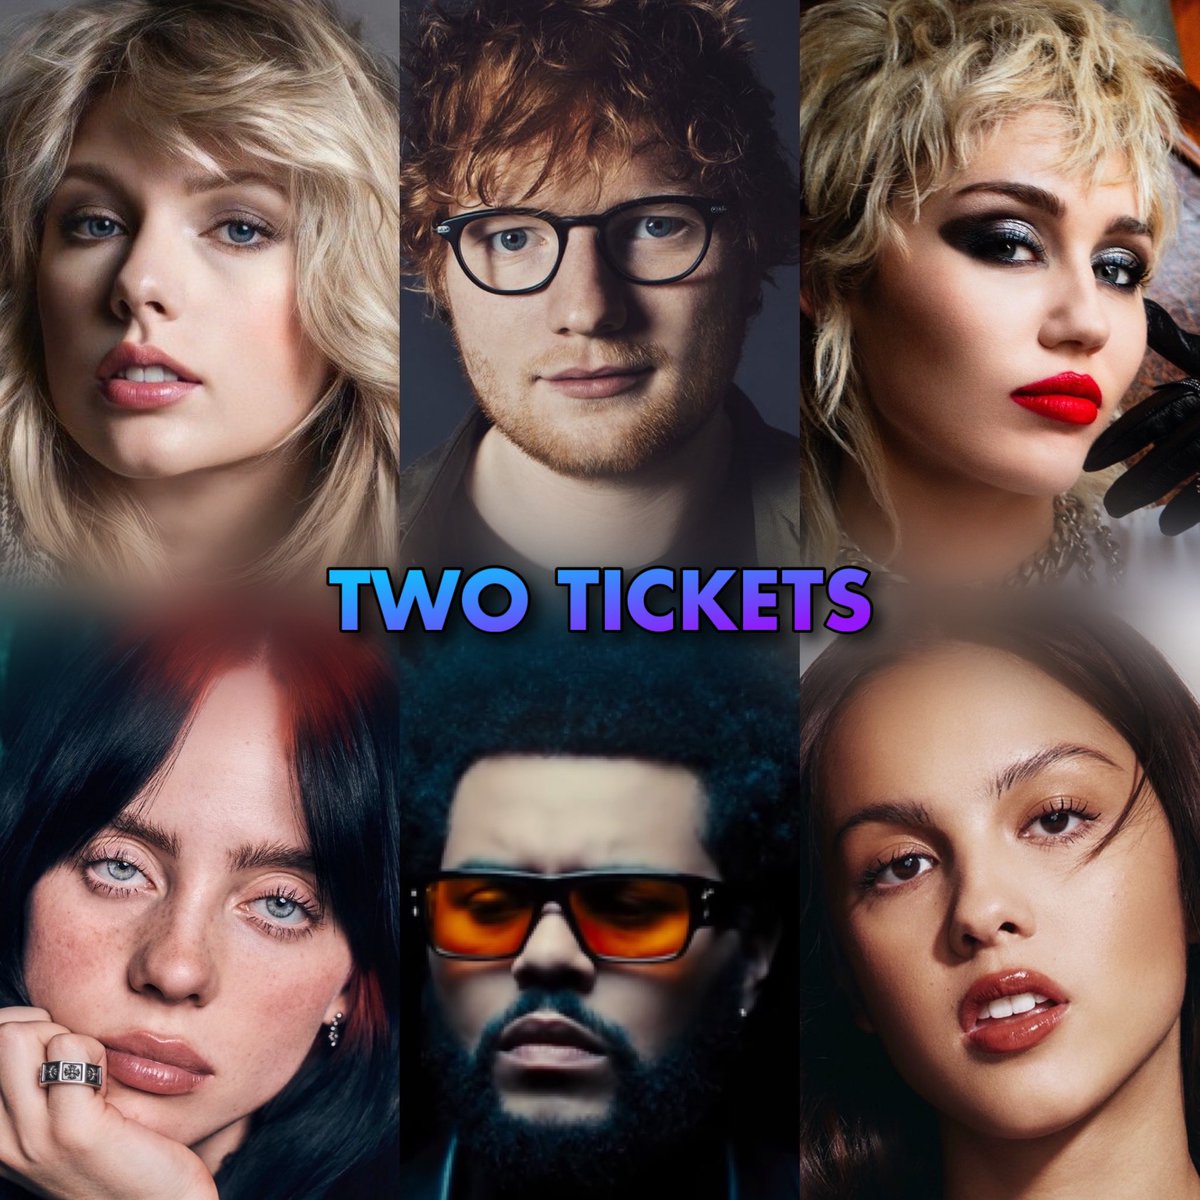 You have two concert tickets to see two of these artists, who are you going to see ?